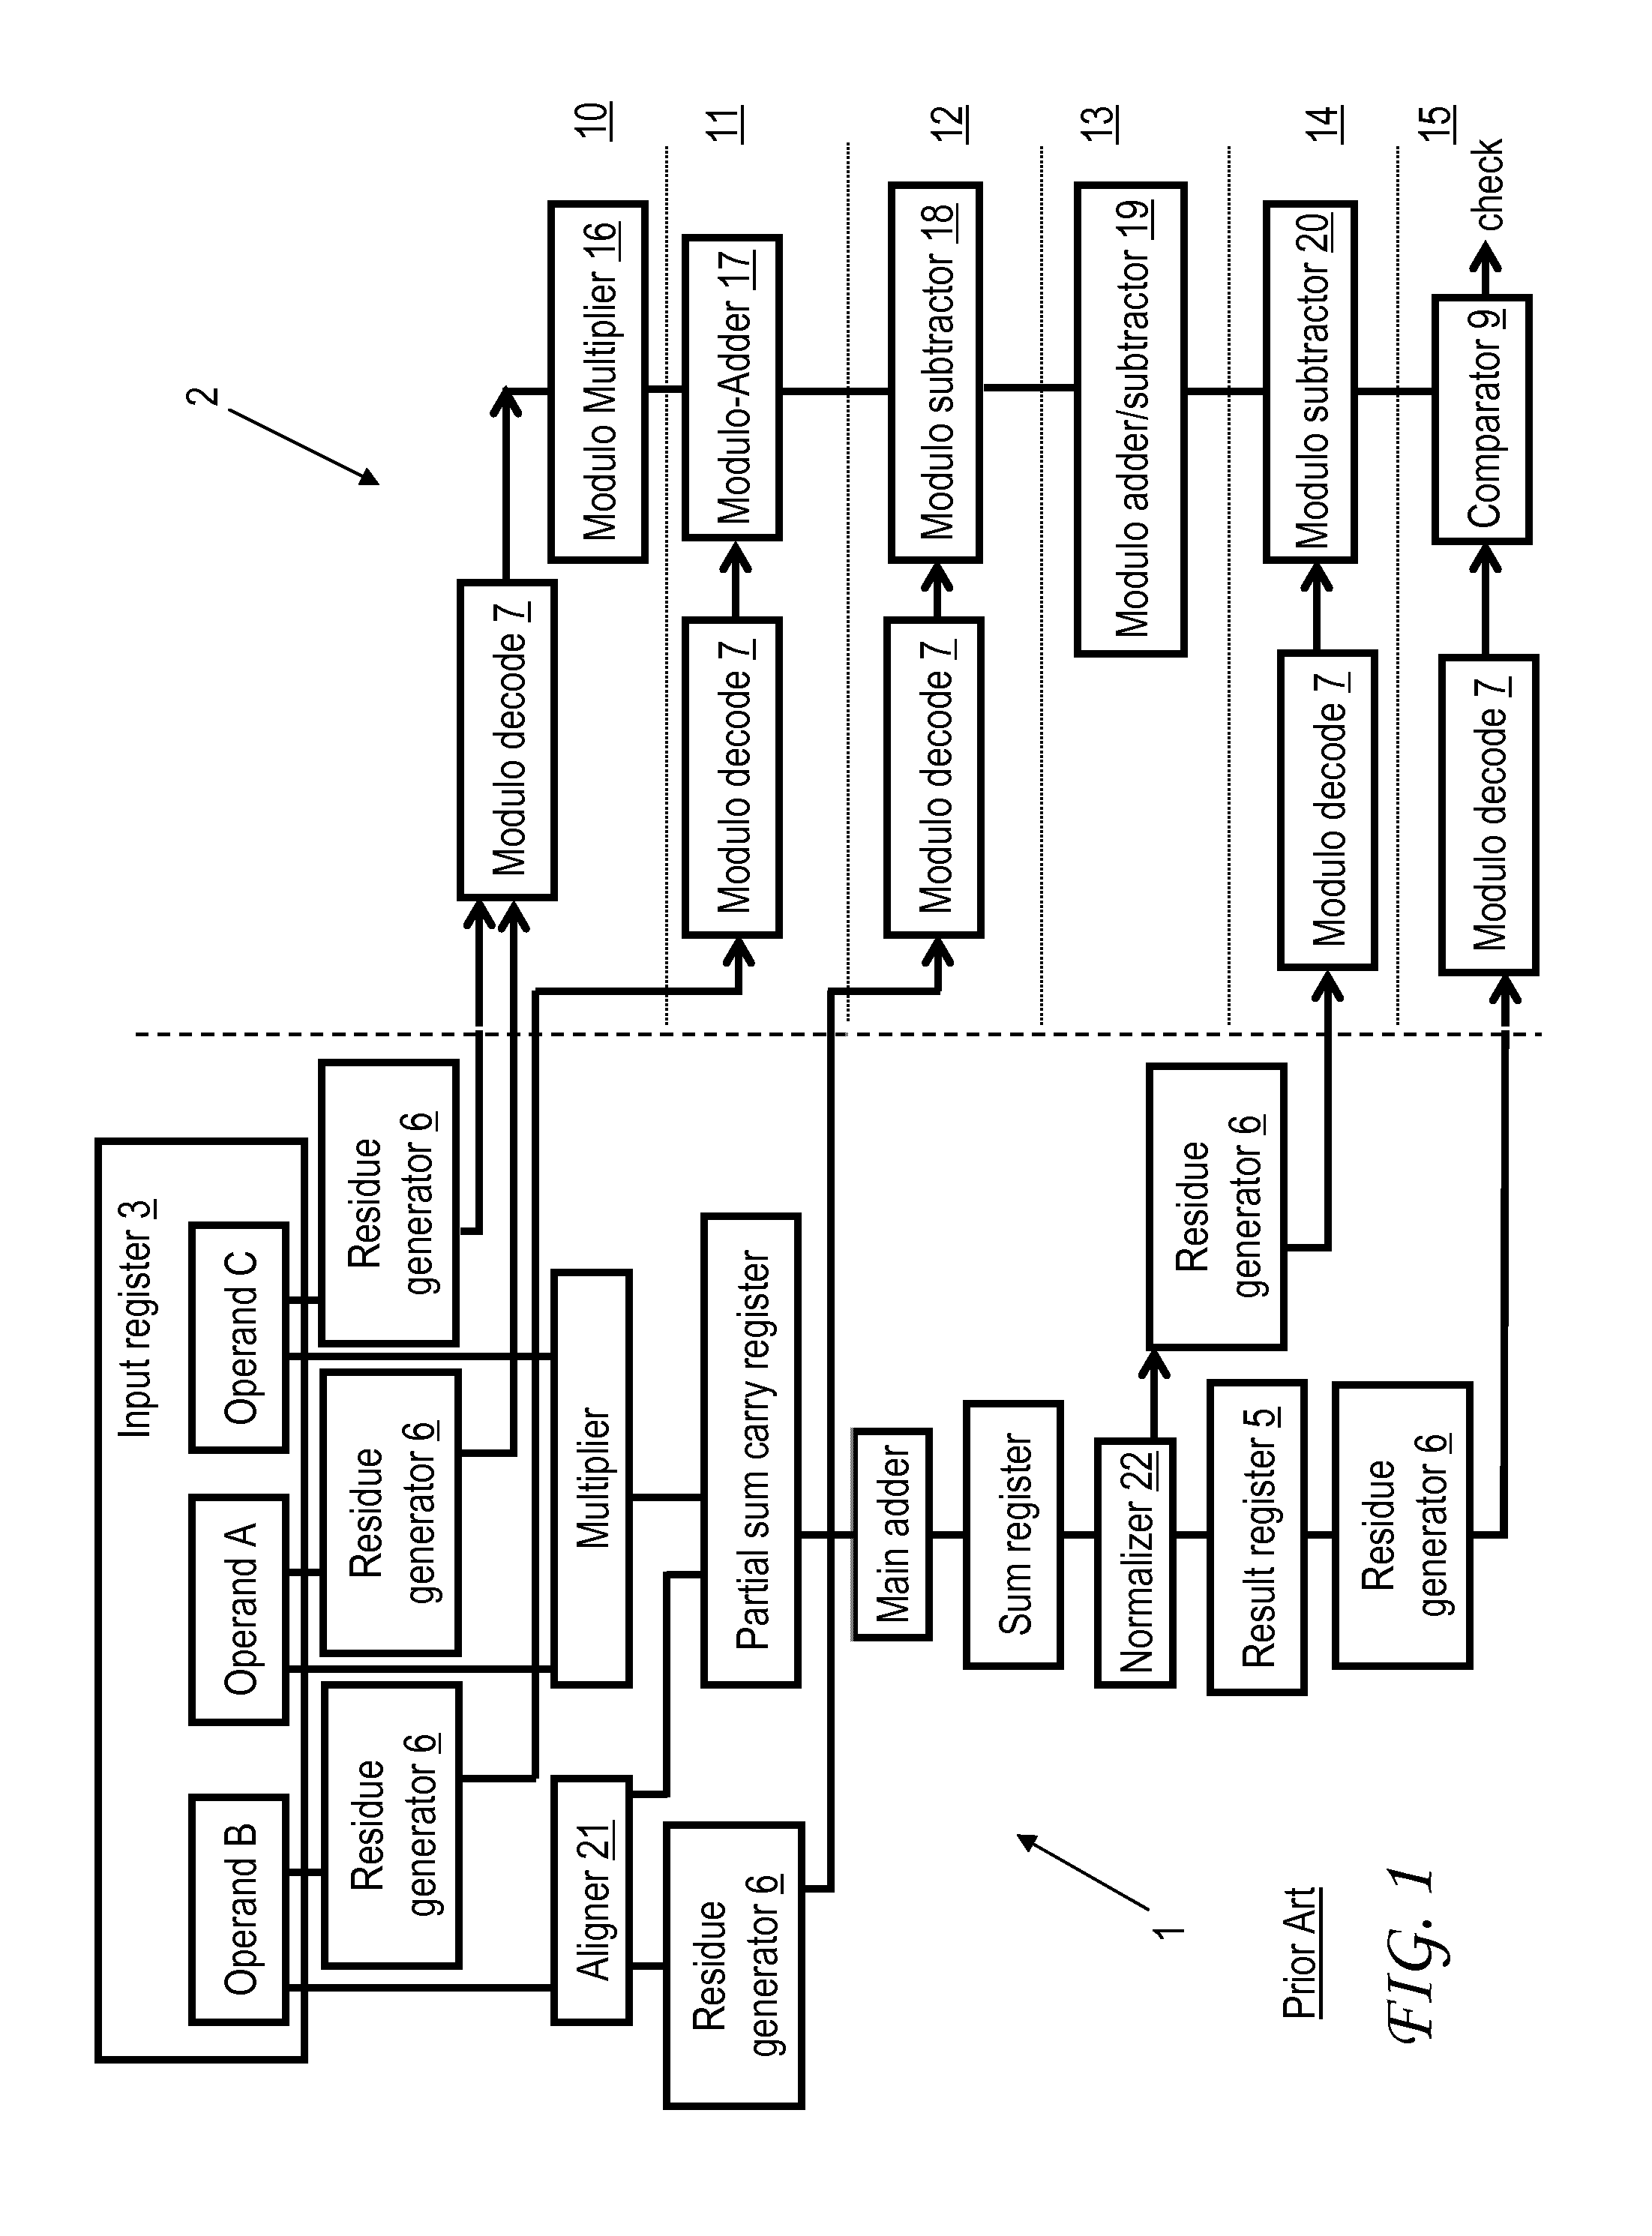 Residue-based error detection for a processor execution unit that supports vector operations